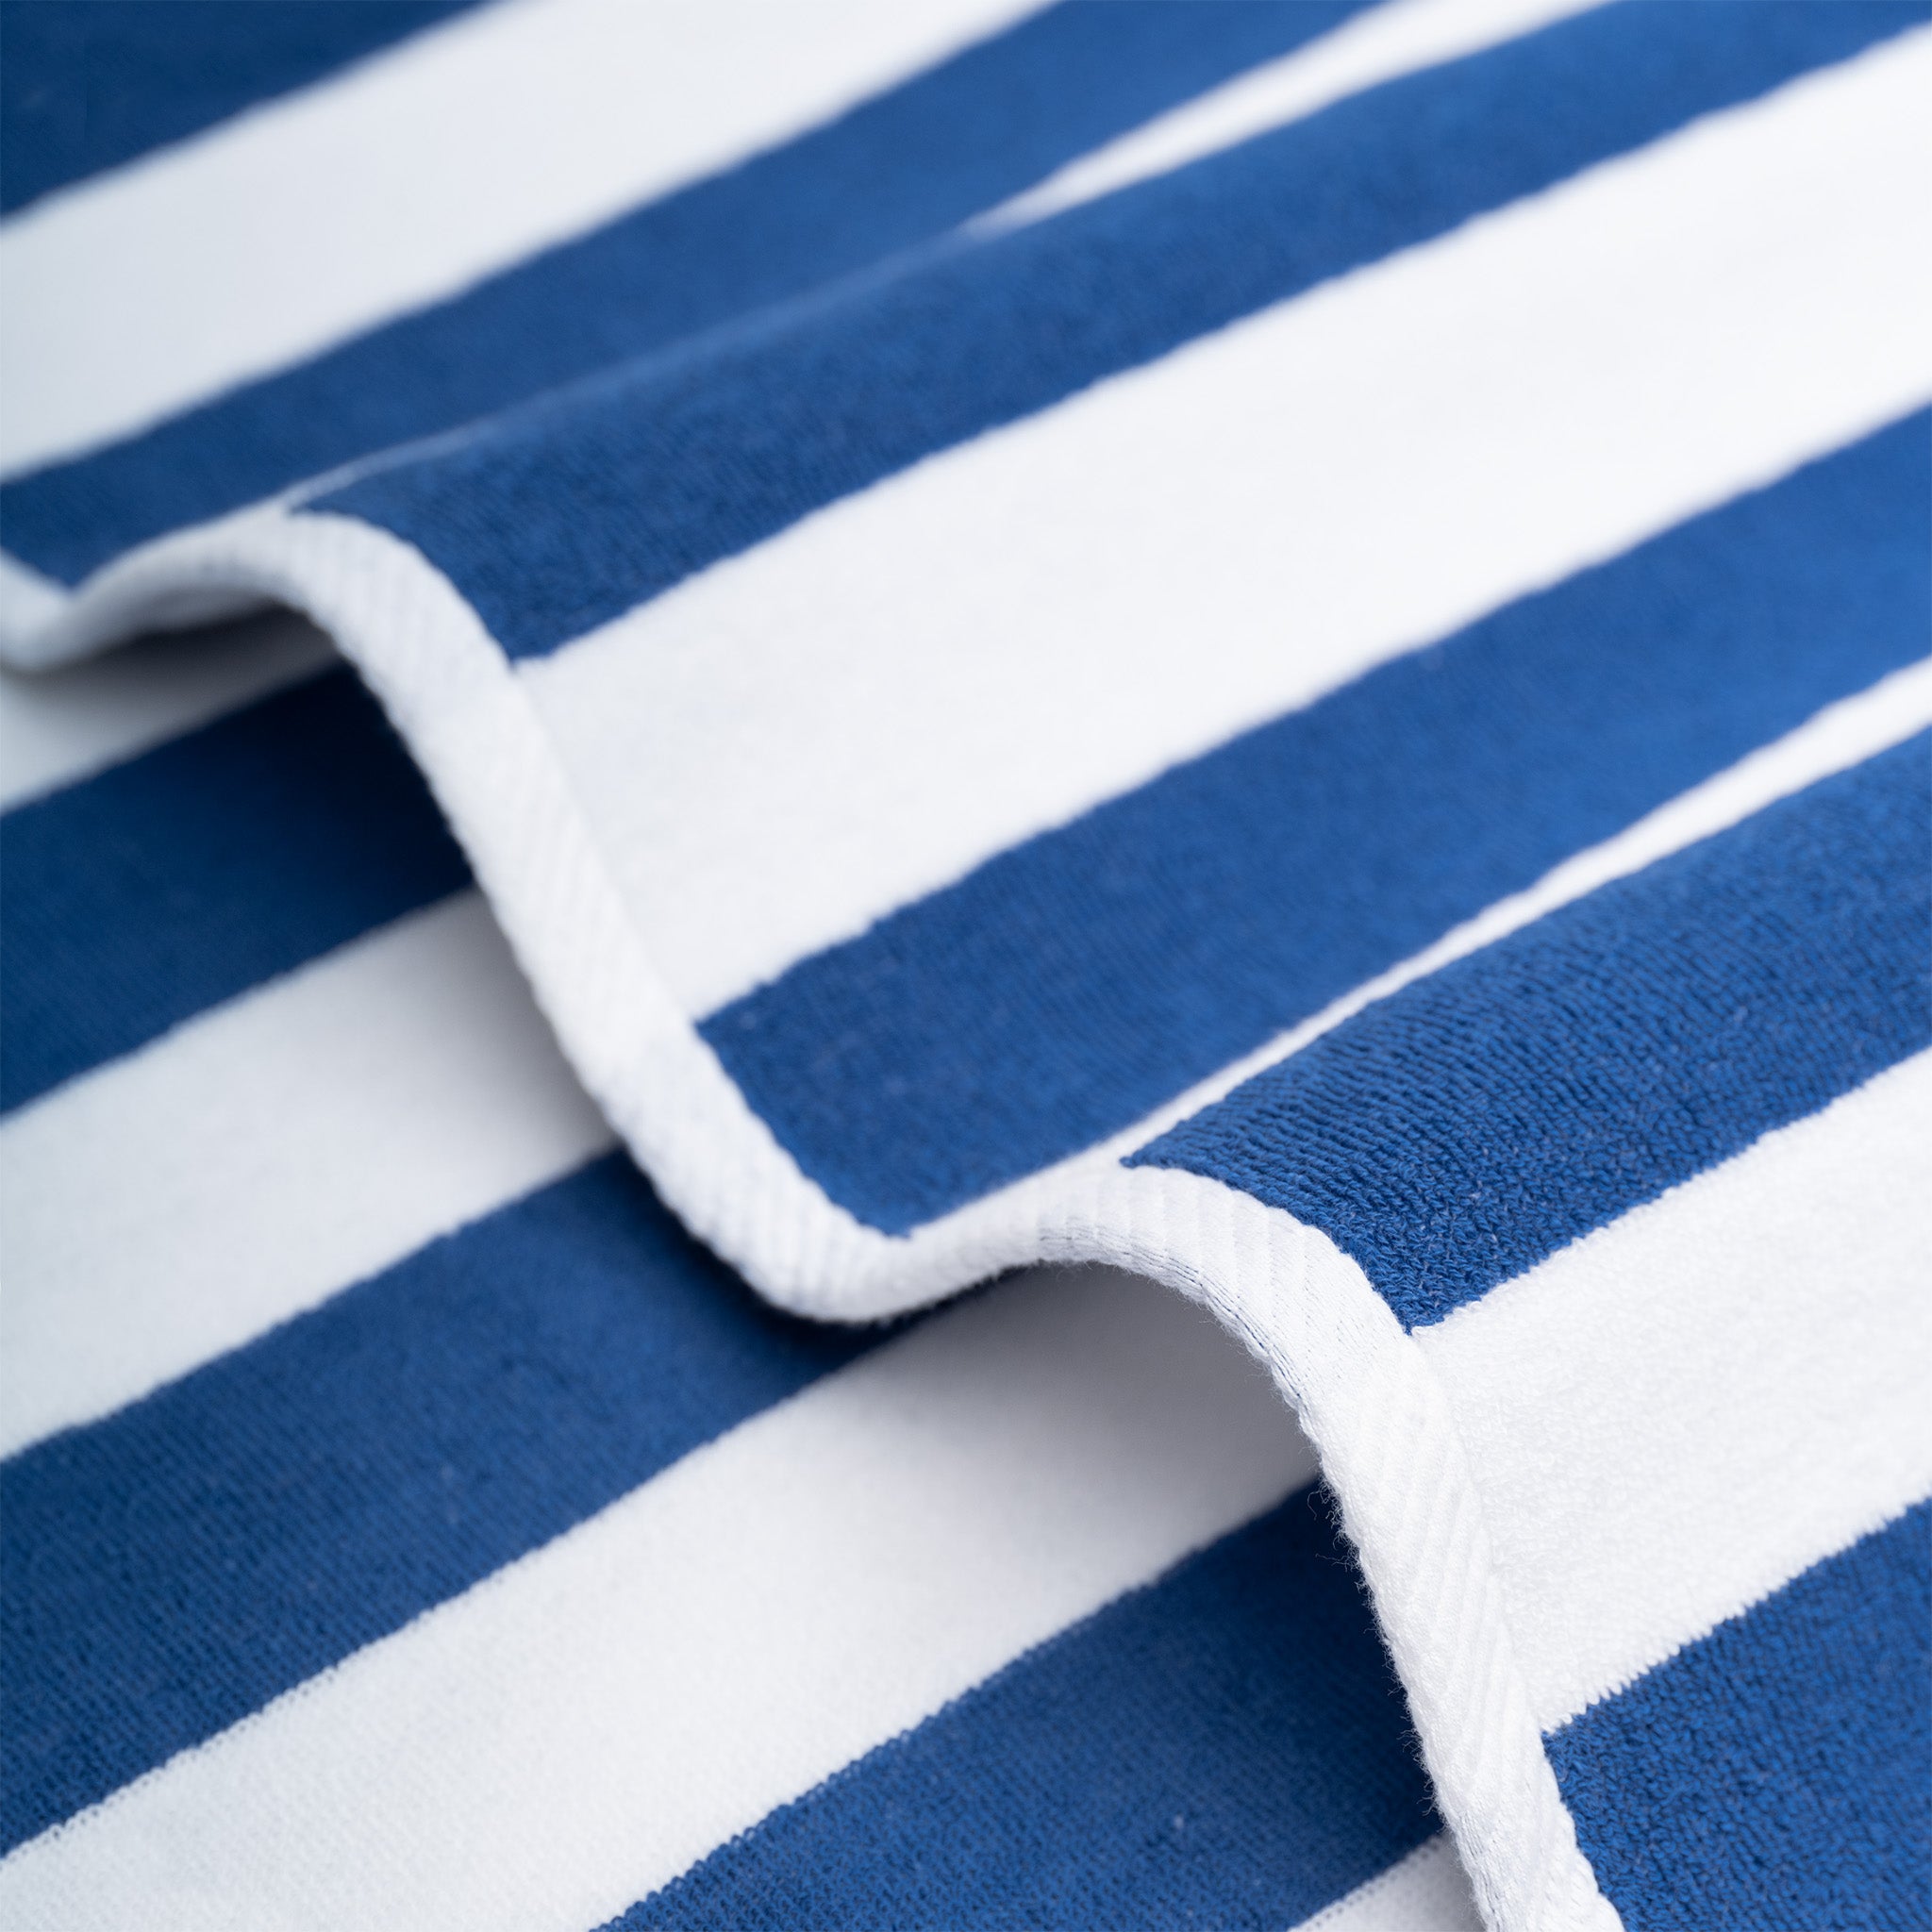 American Soft Linen 100% Cotton 4 Pack Beach Towels Cabana Striped Pool Towels -navy-blue-5